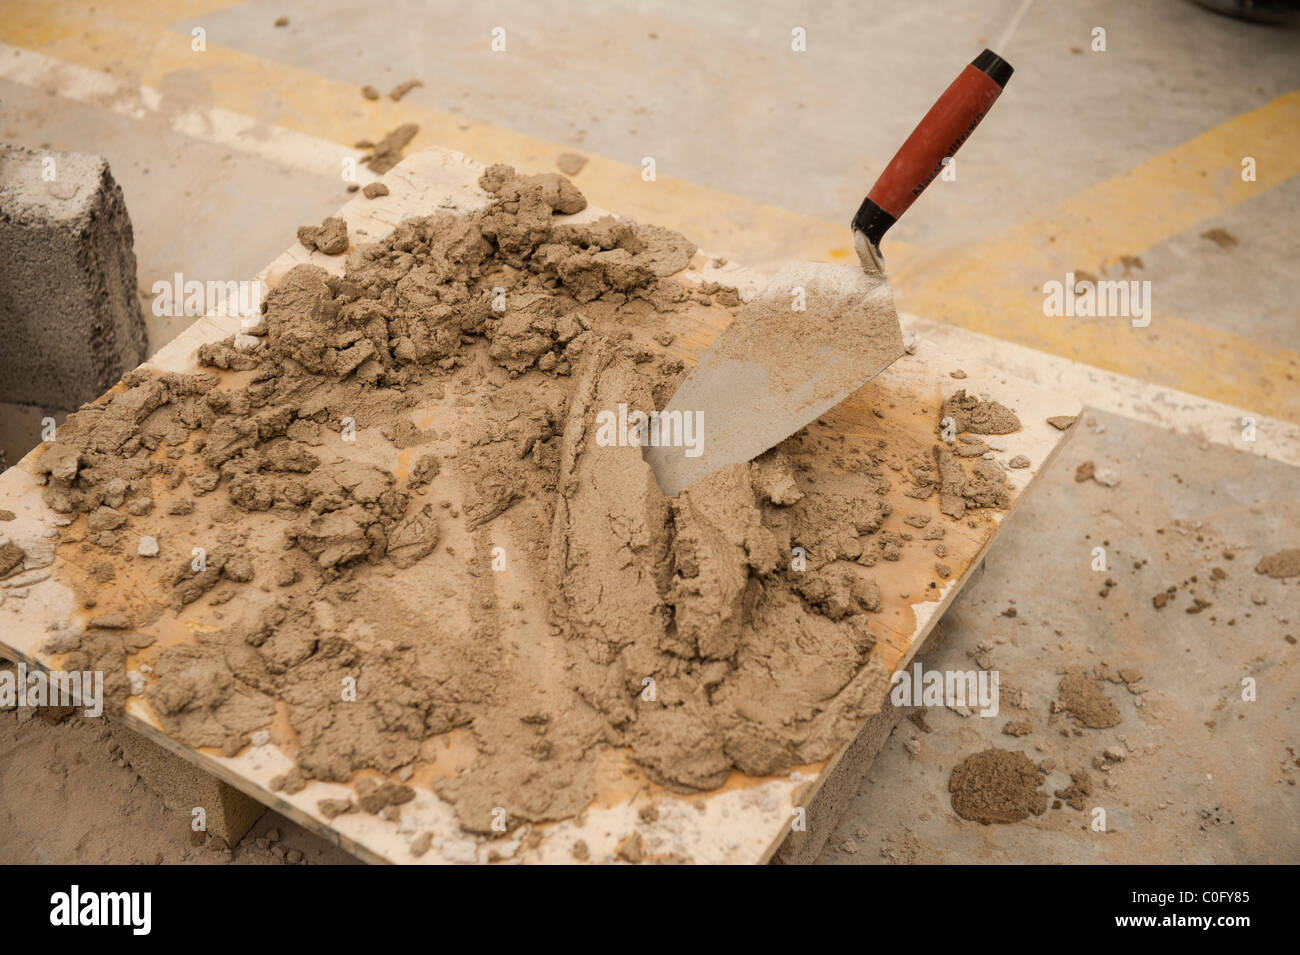 A trowel in a pile of cement, UK Stock Photo